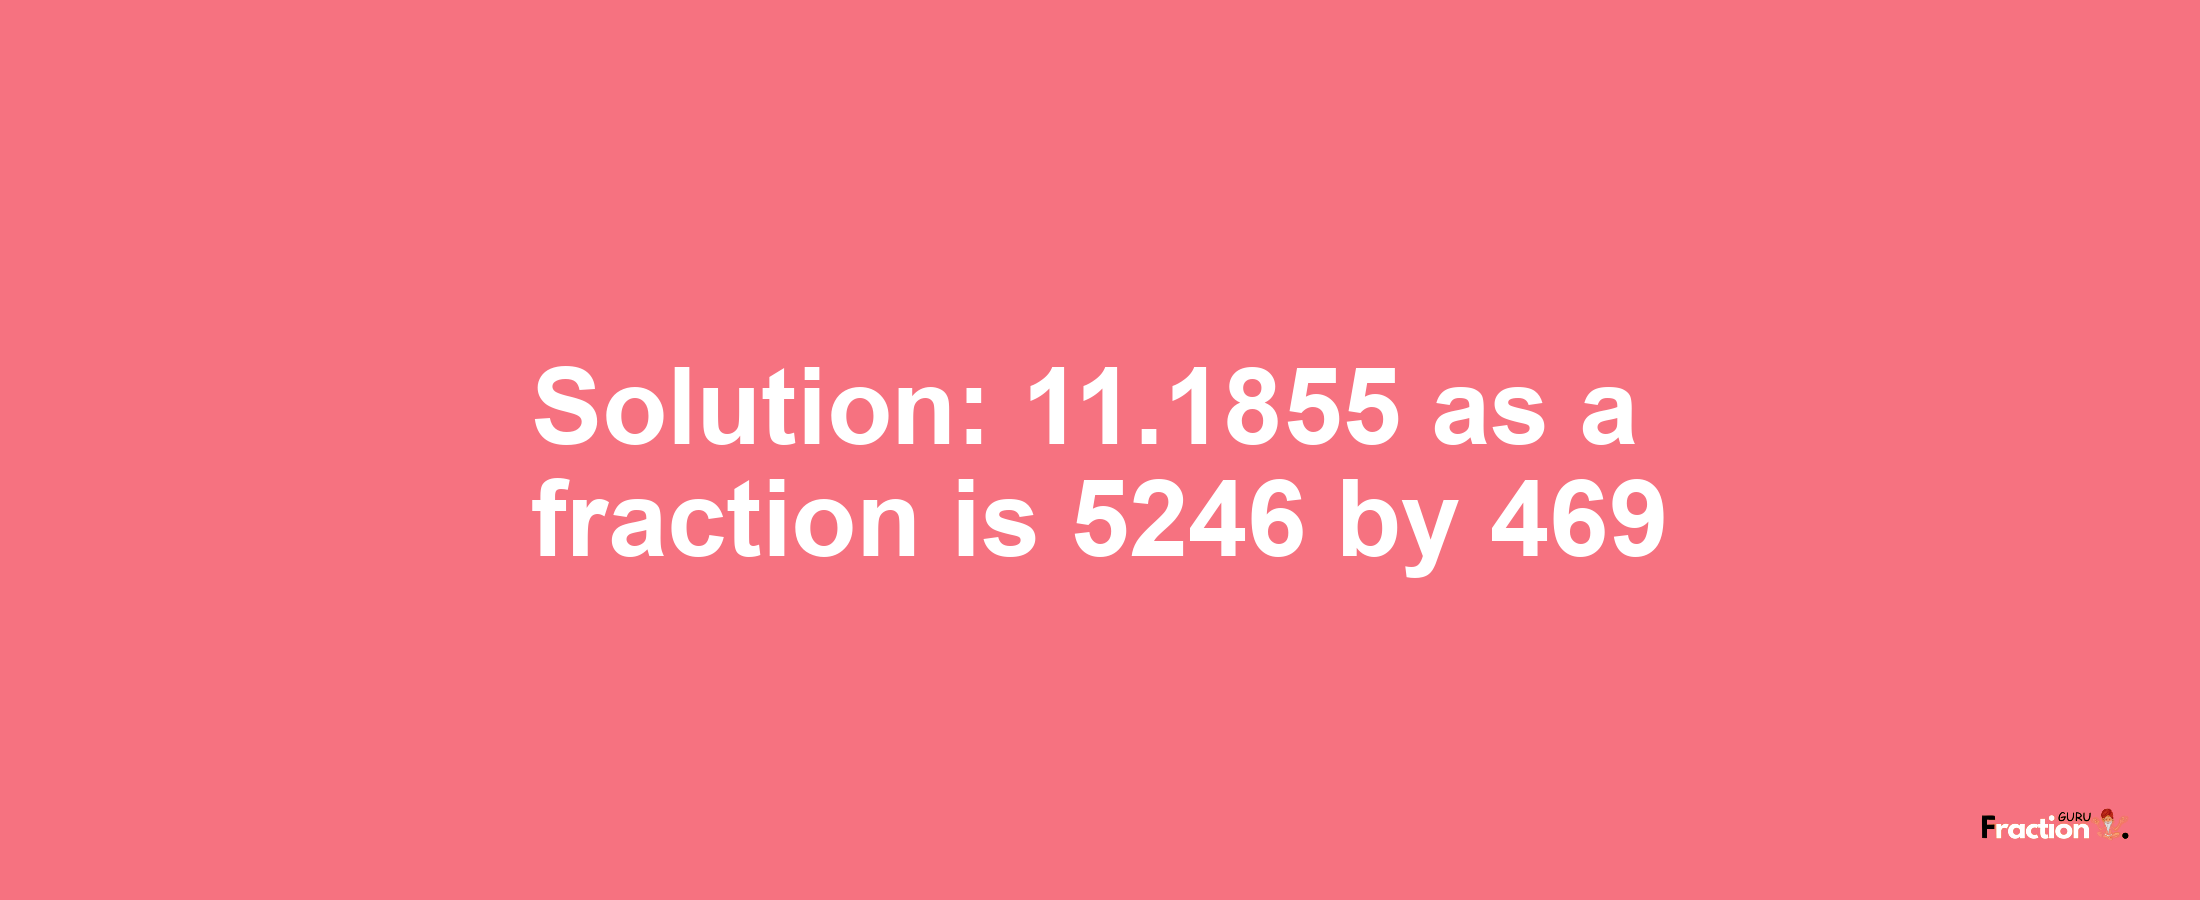 Solution:11.1855 as a fraction is 5246/469